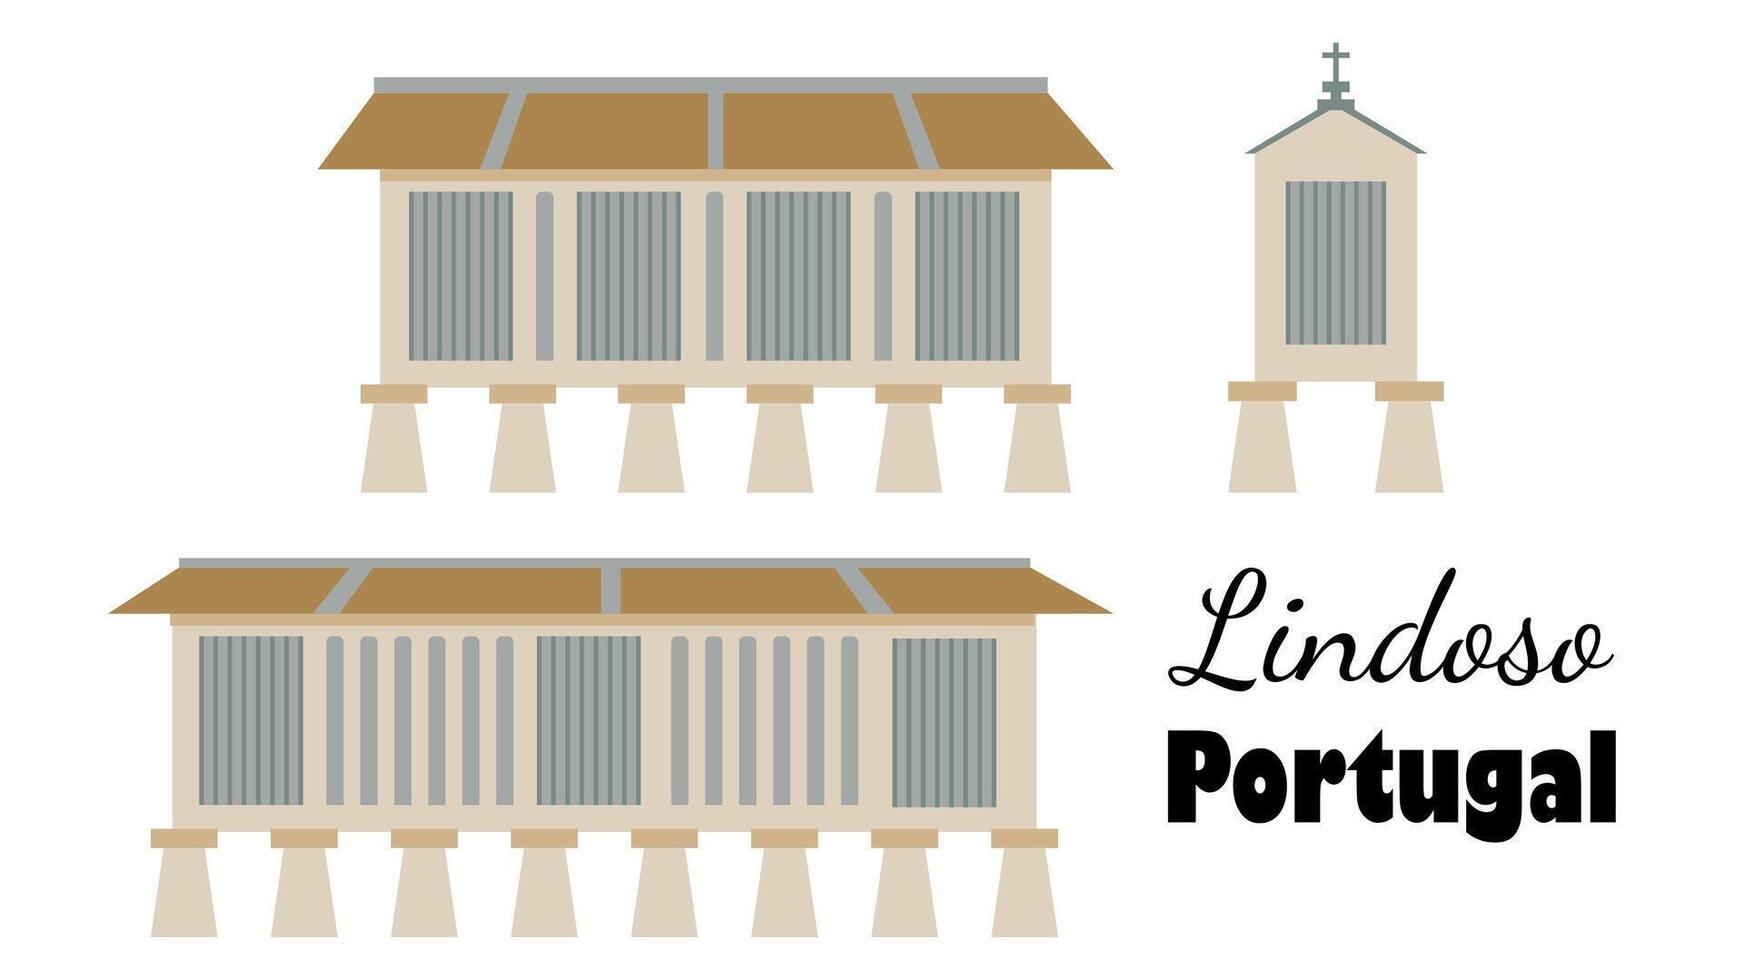 Lindoso Portugal. Ancient barns raised above the ground to protect the grain from rodents. Flat-style illustration vector